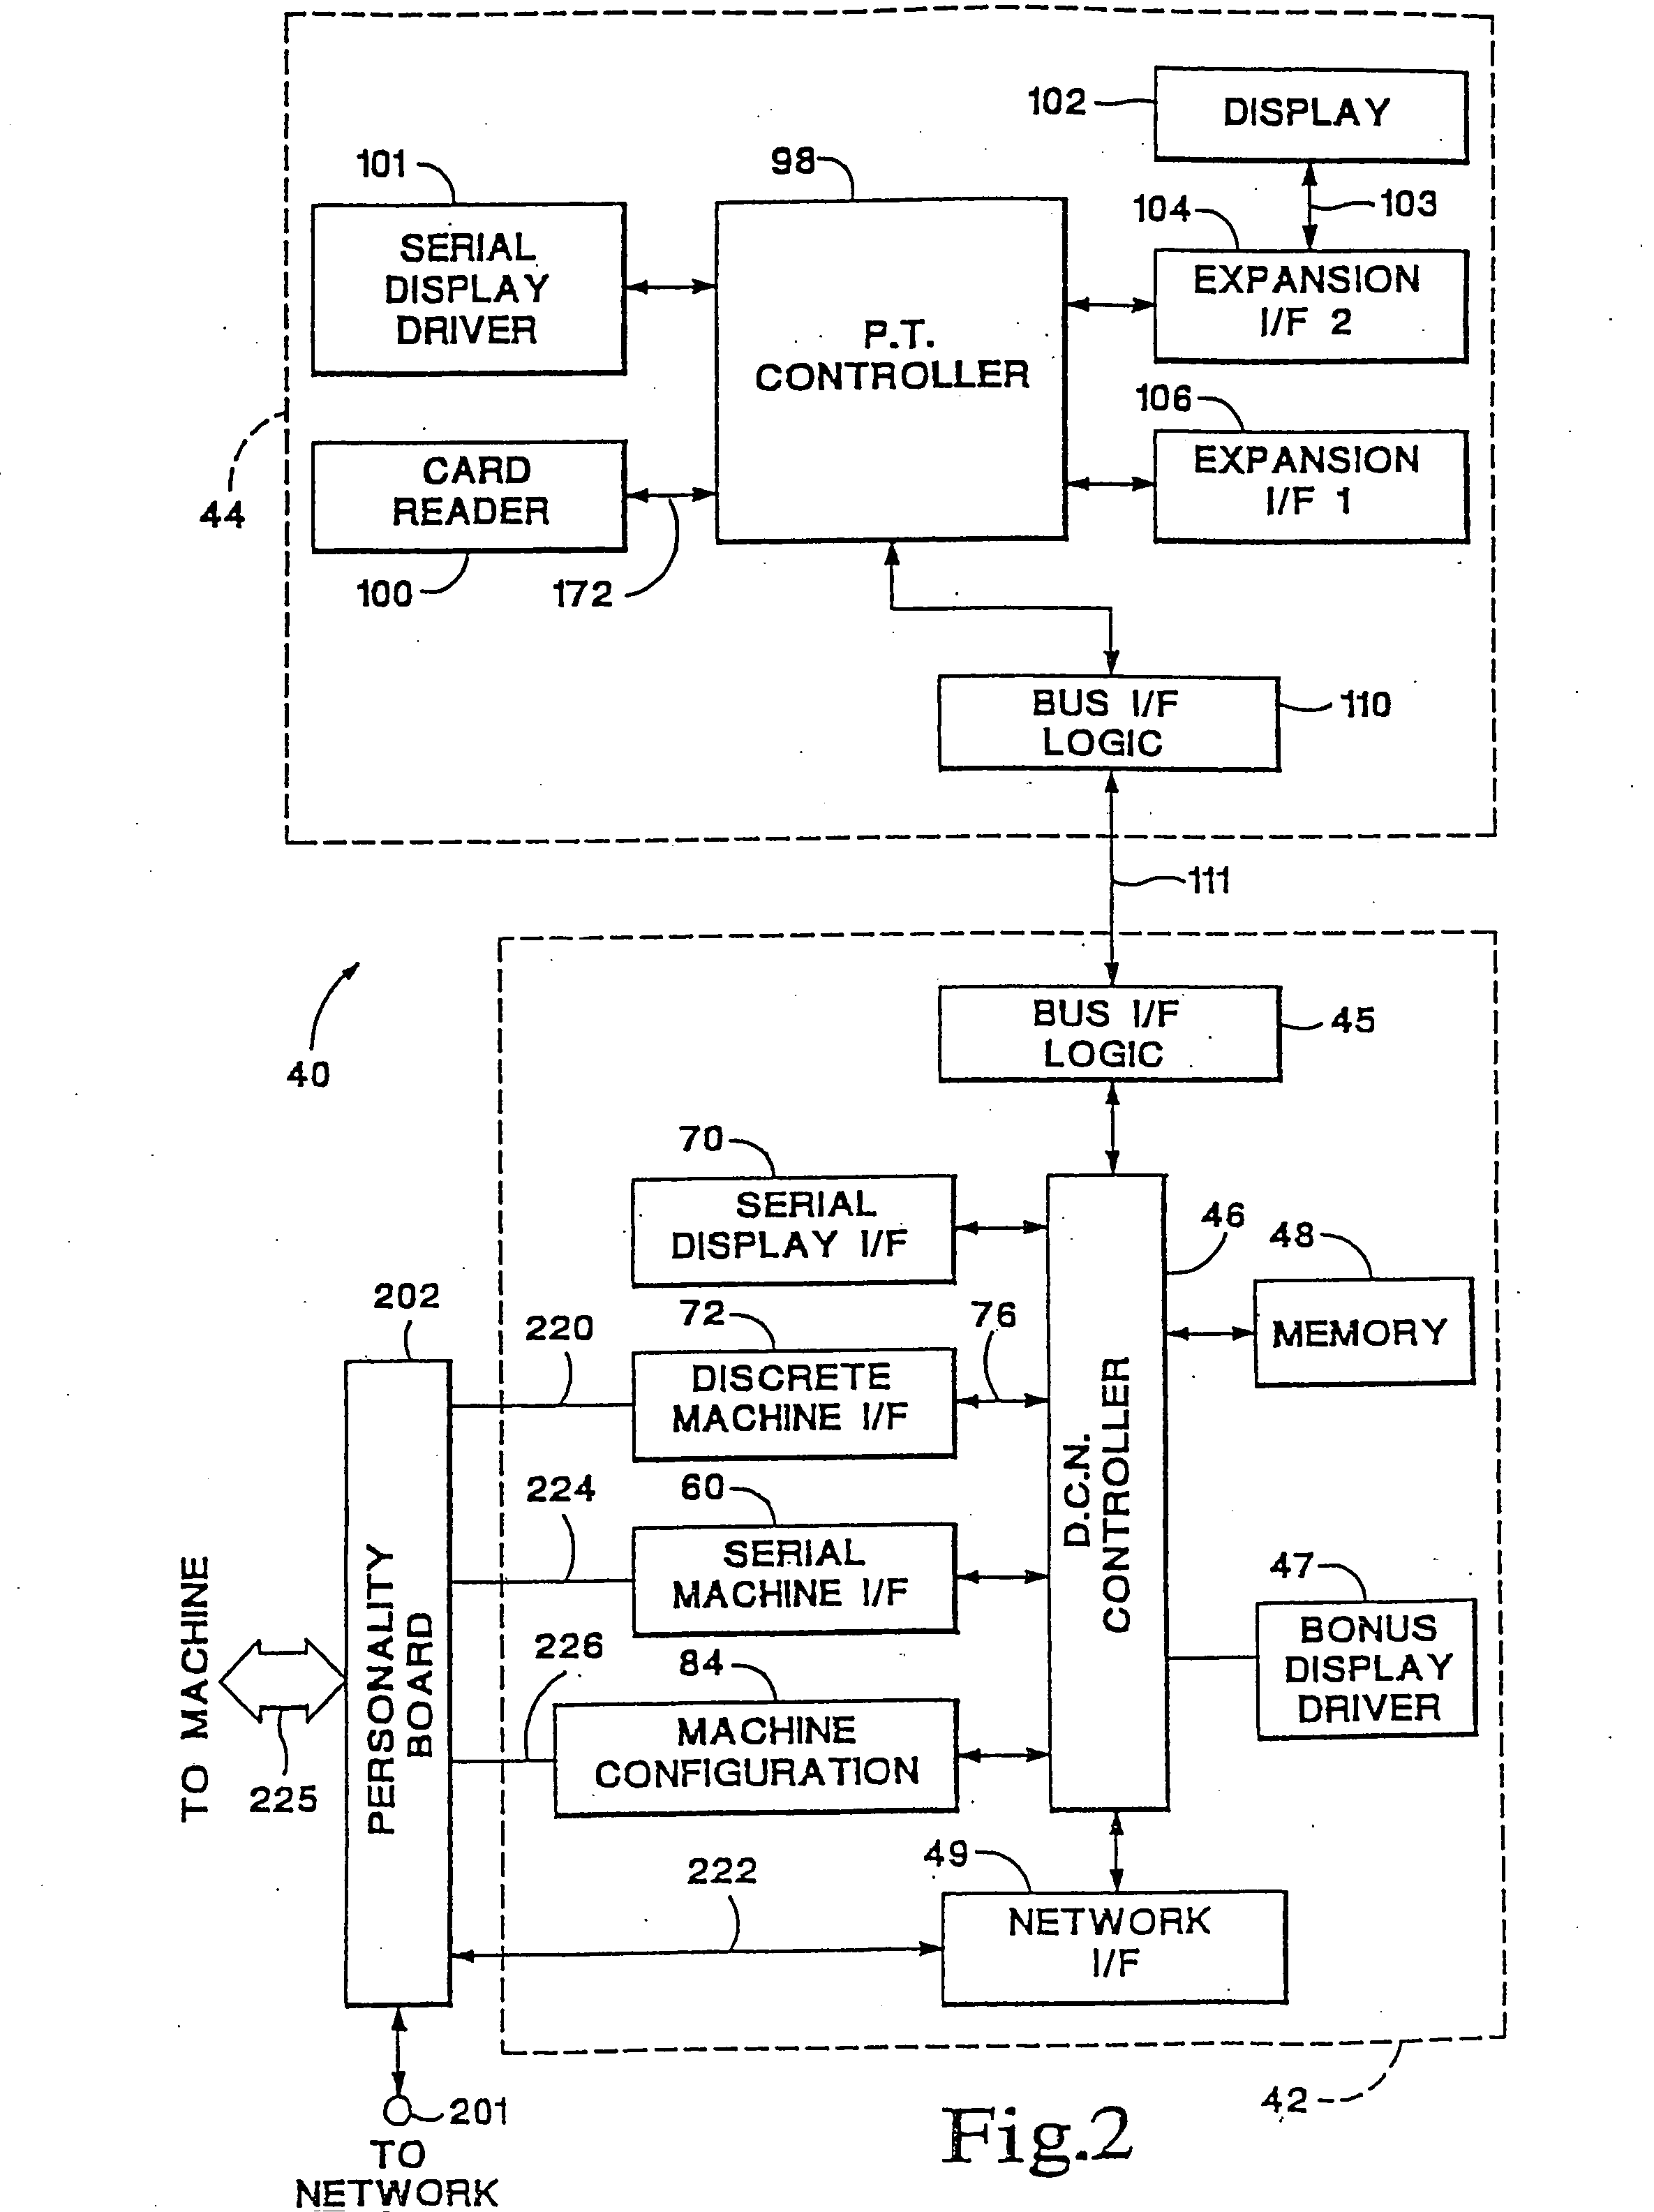 Method for providing incentive to play gaming devices connected by a network to a host computer